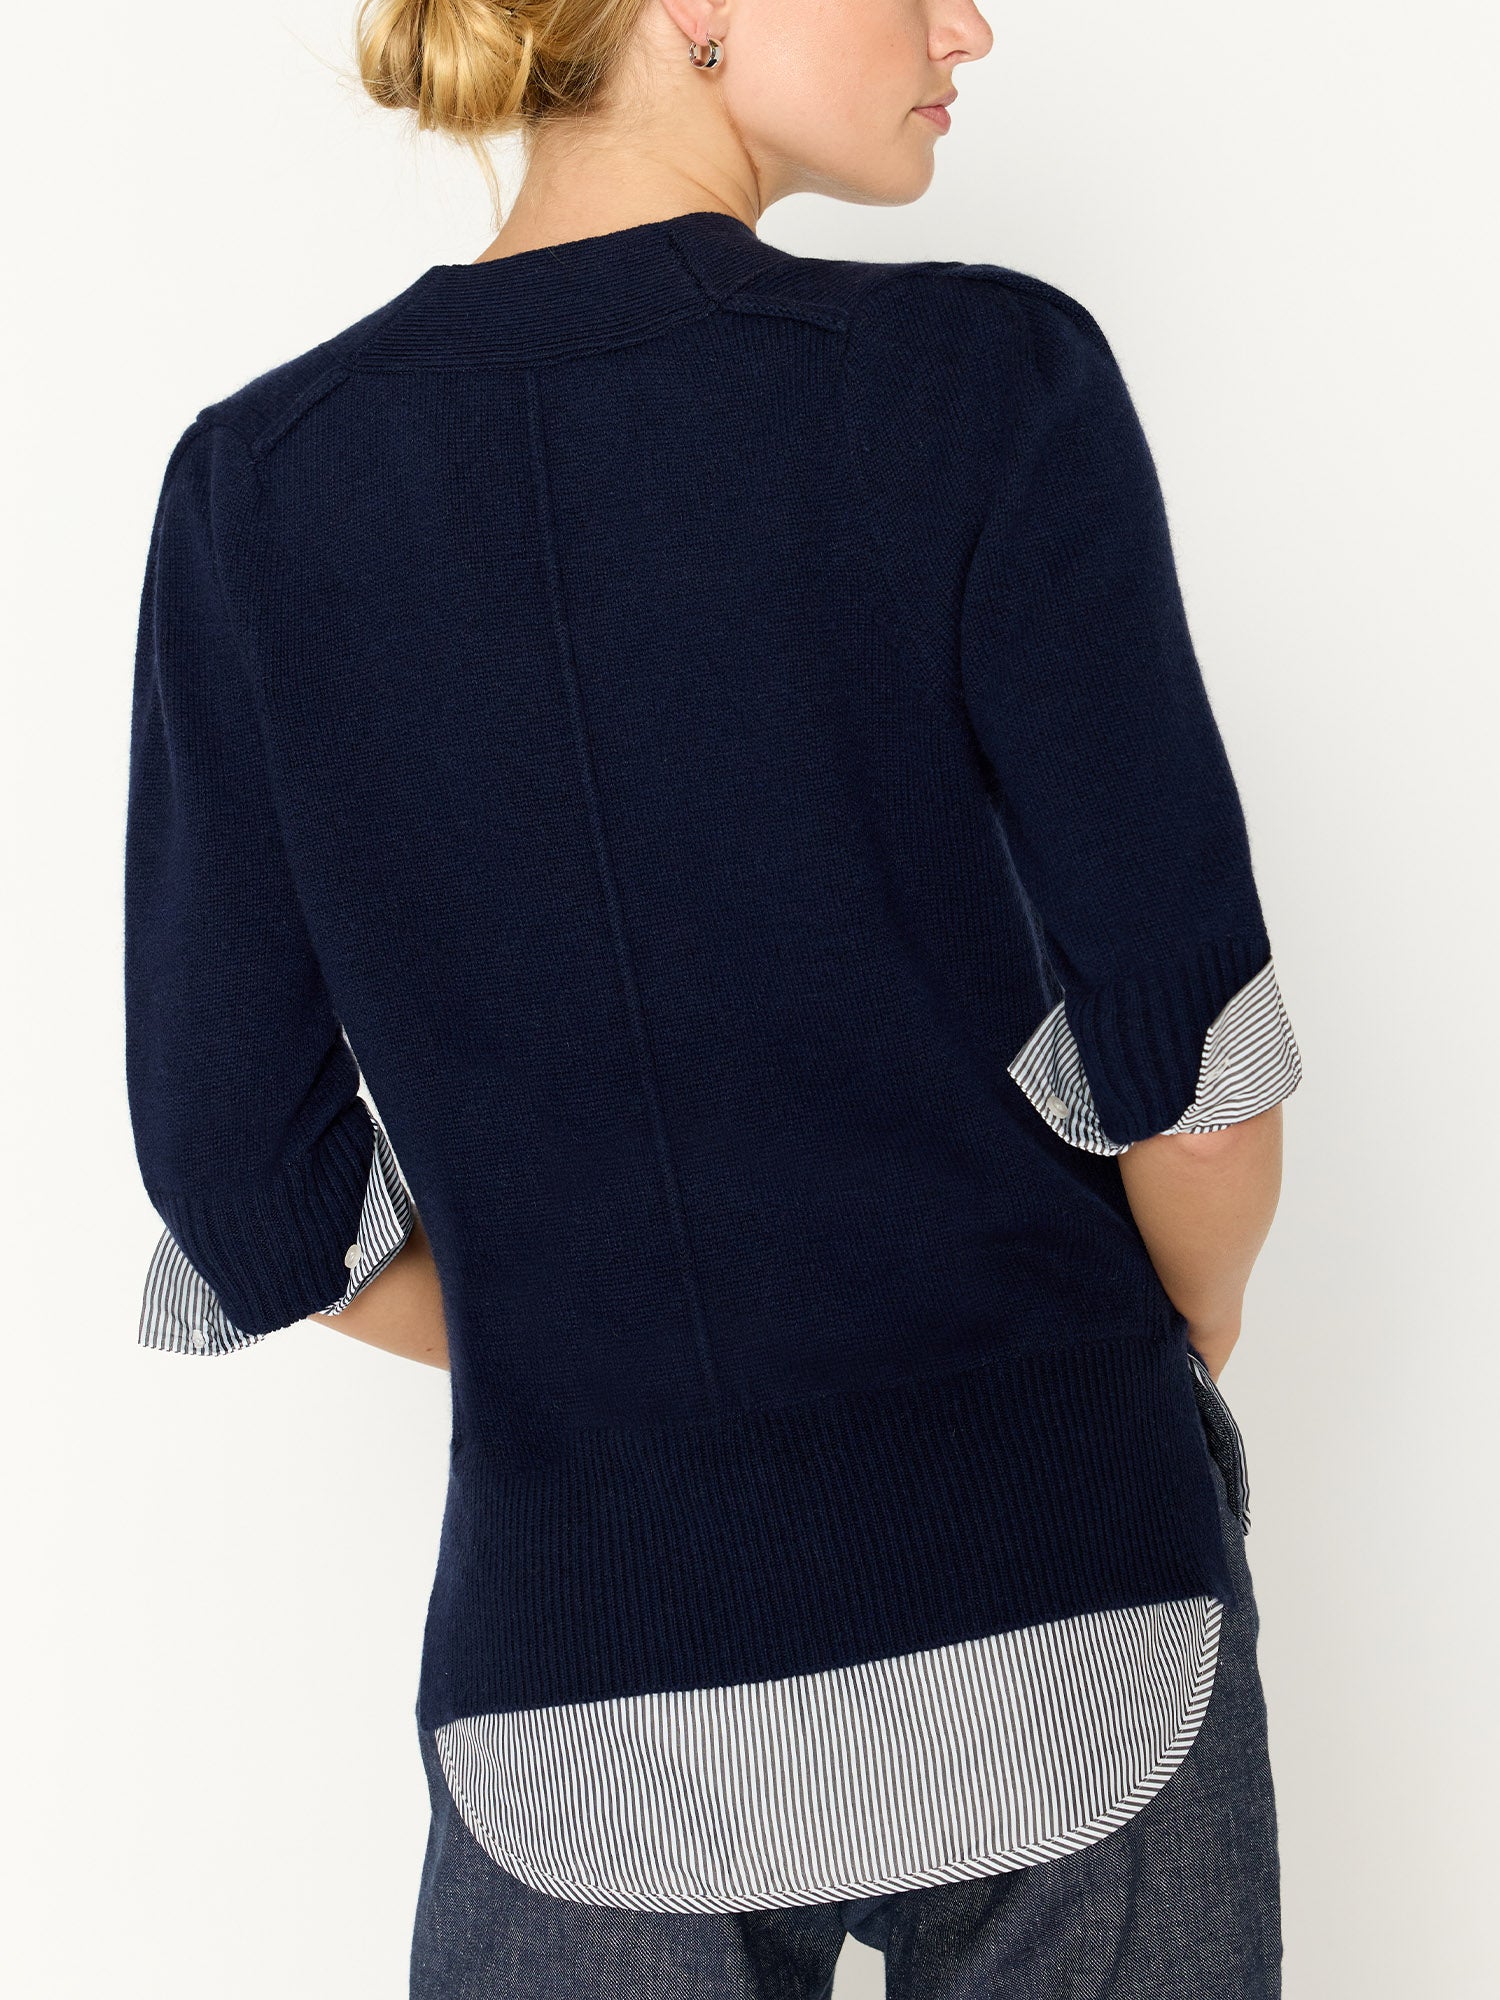 Lucie navy stripe layered three-quarter sleeve v-neck sweater back view